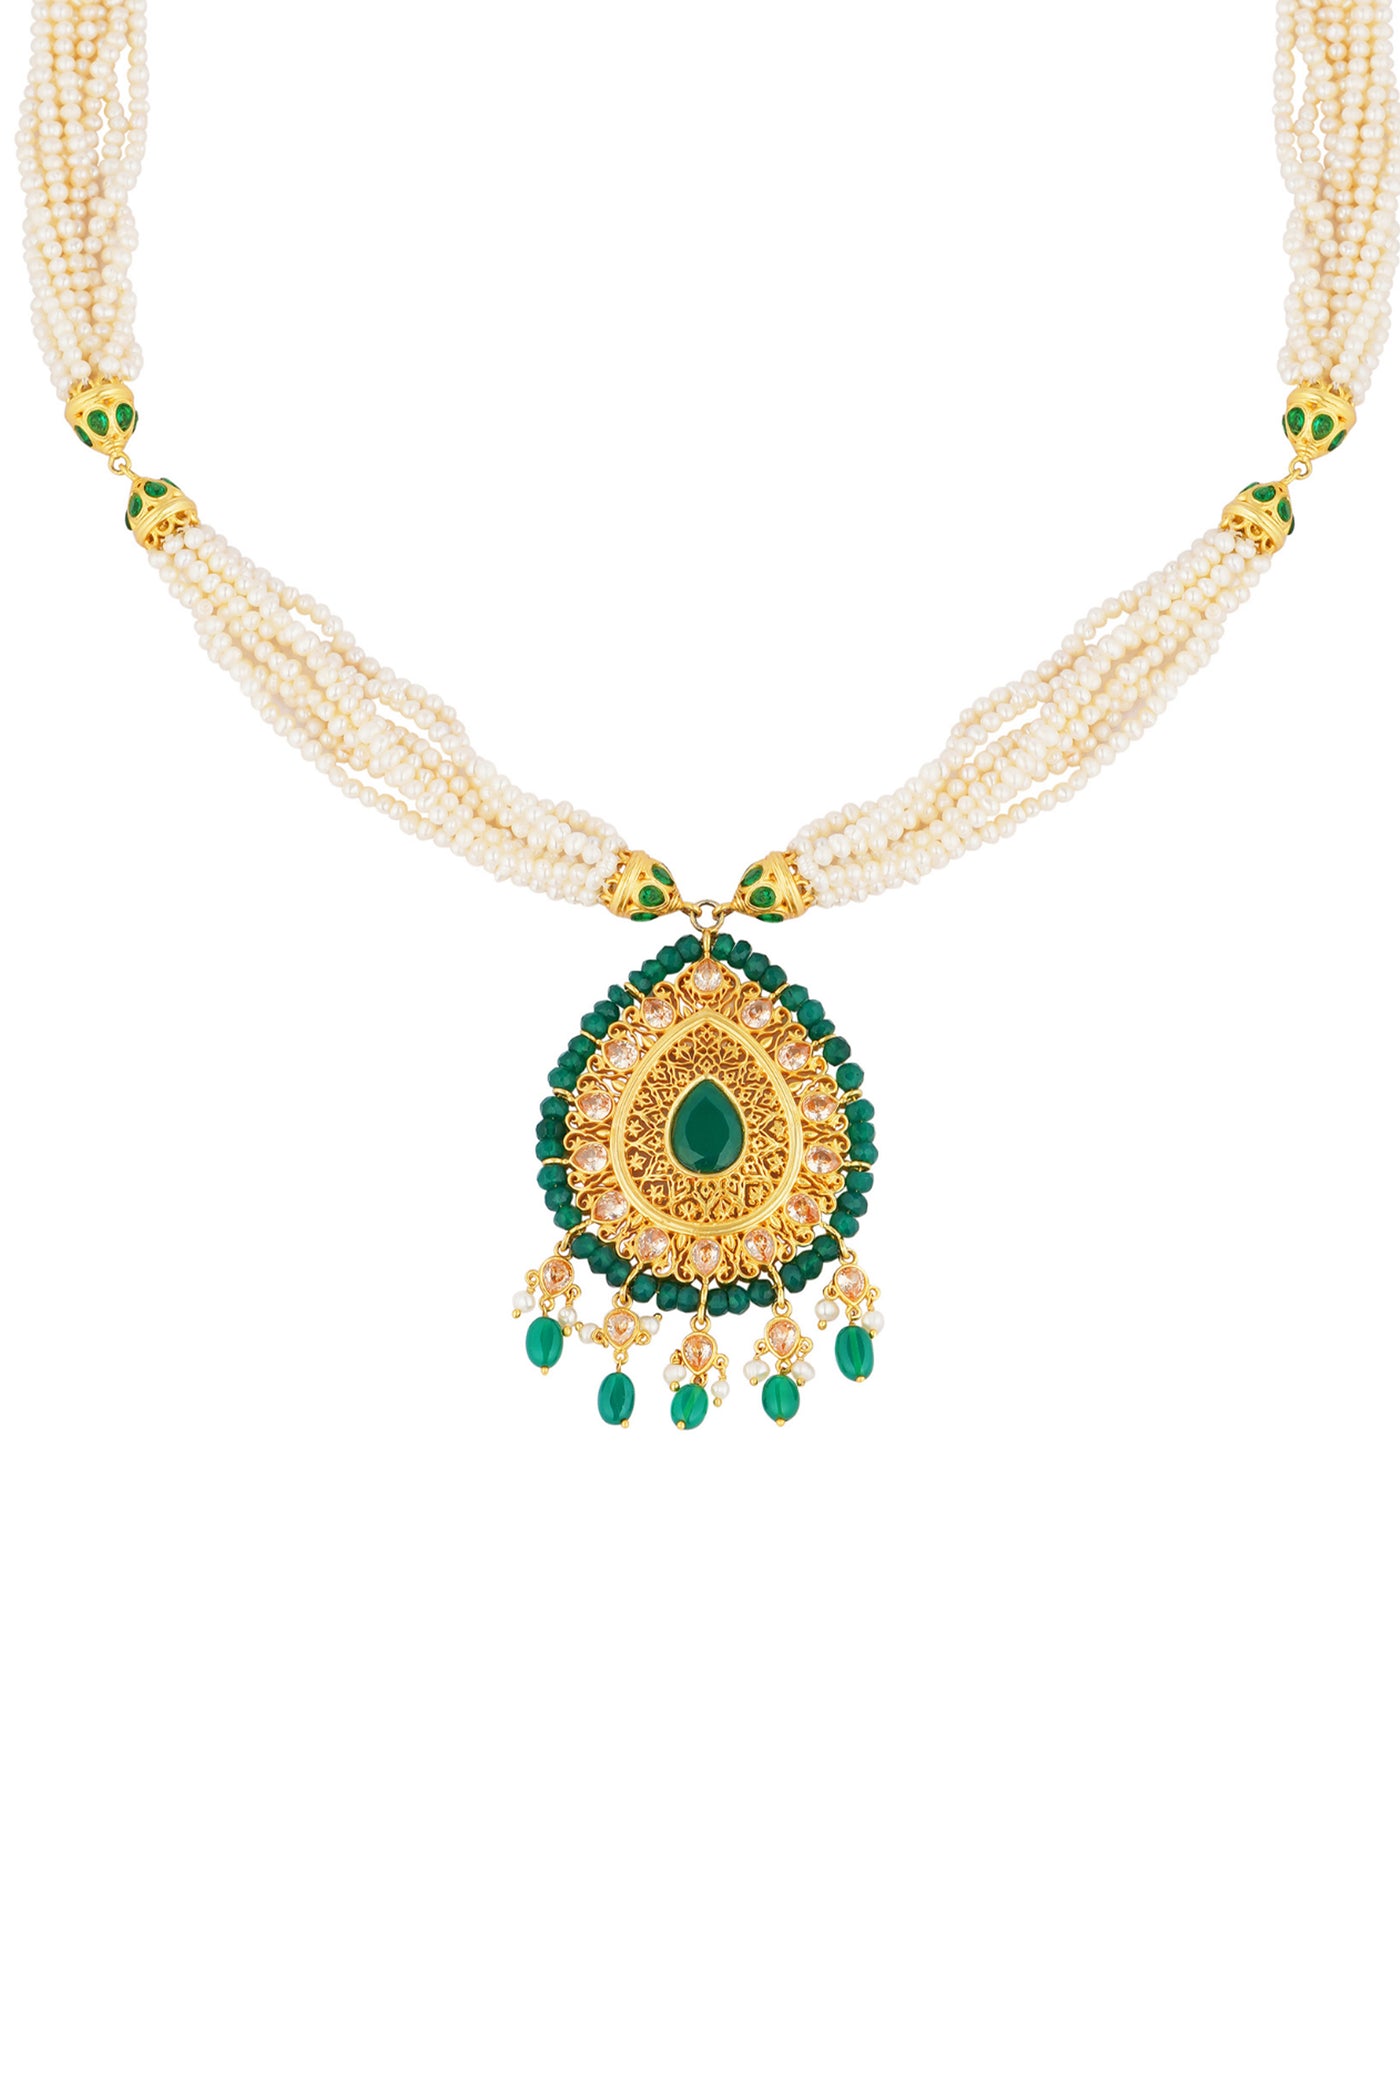 Zariin Green White Pearls Gold Plated Handcrafted Long Necklace festive imitation fashion jewellery online shopping melange singapore indian designer wear